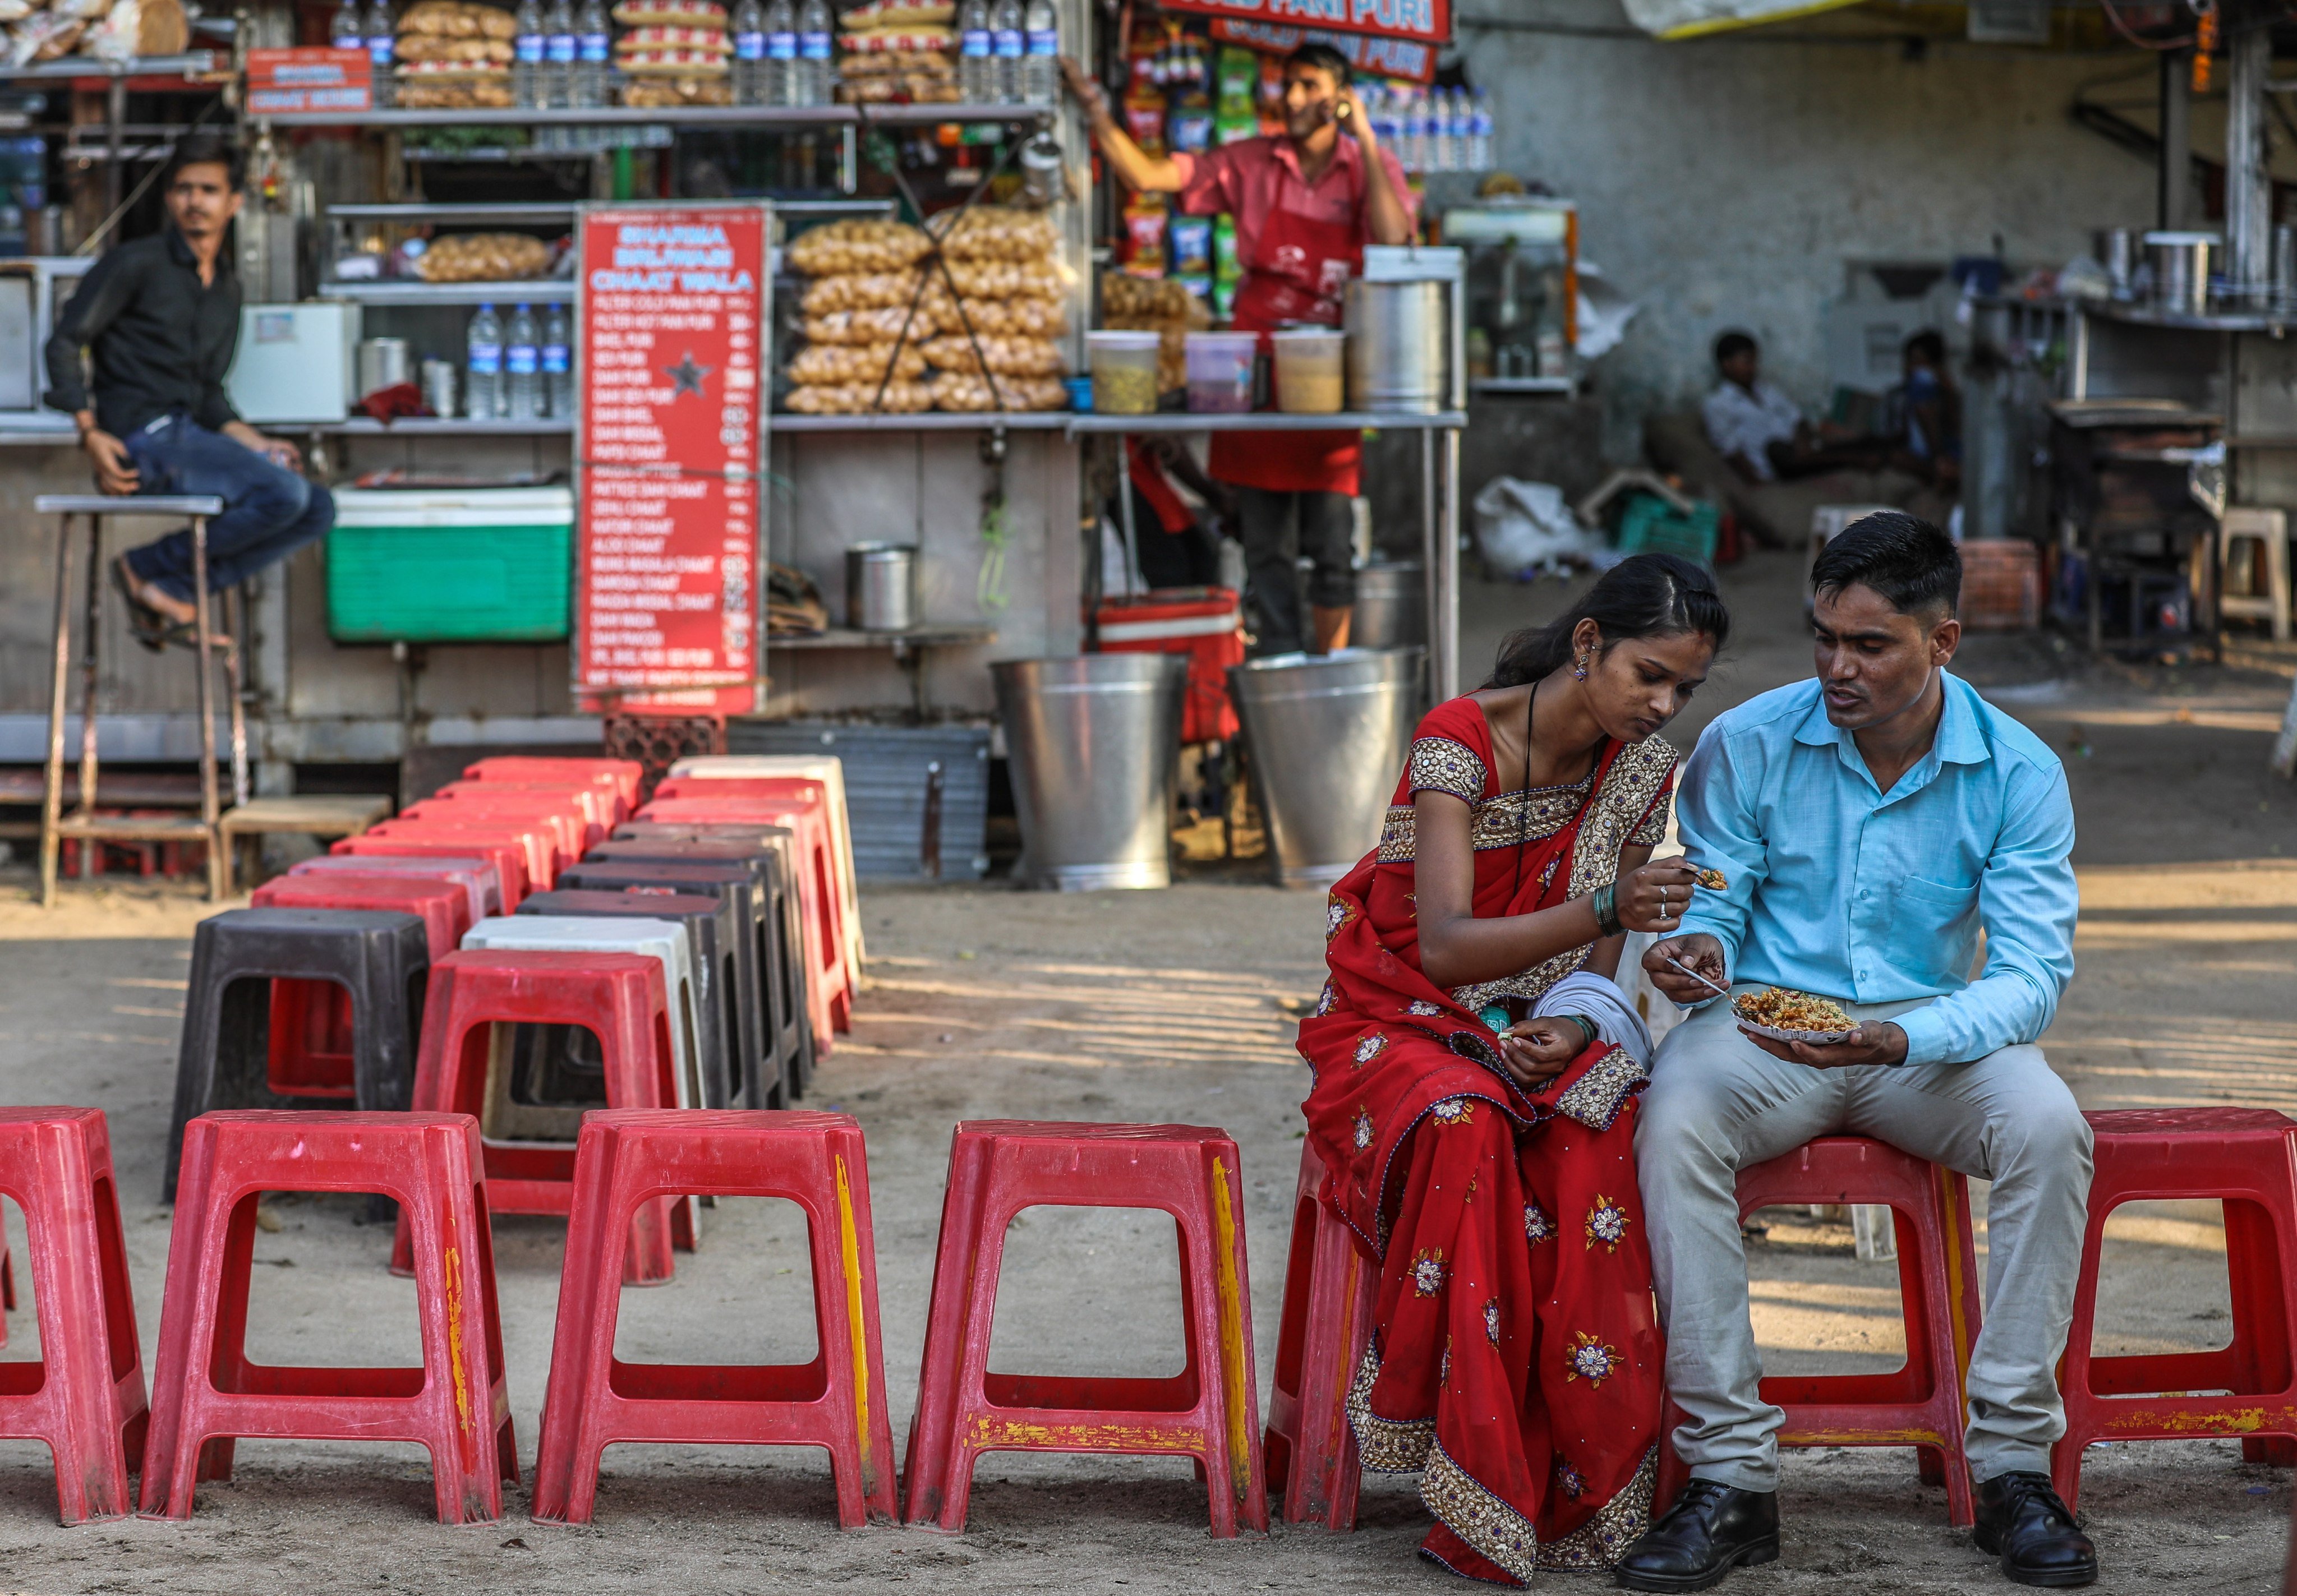 An Indian couple enjoys some street food in Mumbai. Official data shows the total fertility rate in India has dropped 20 per cent in the last 10 years to below replacement levels. Photo: EPA-EFE